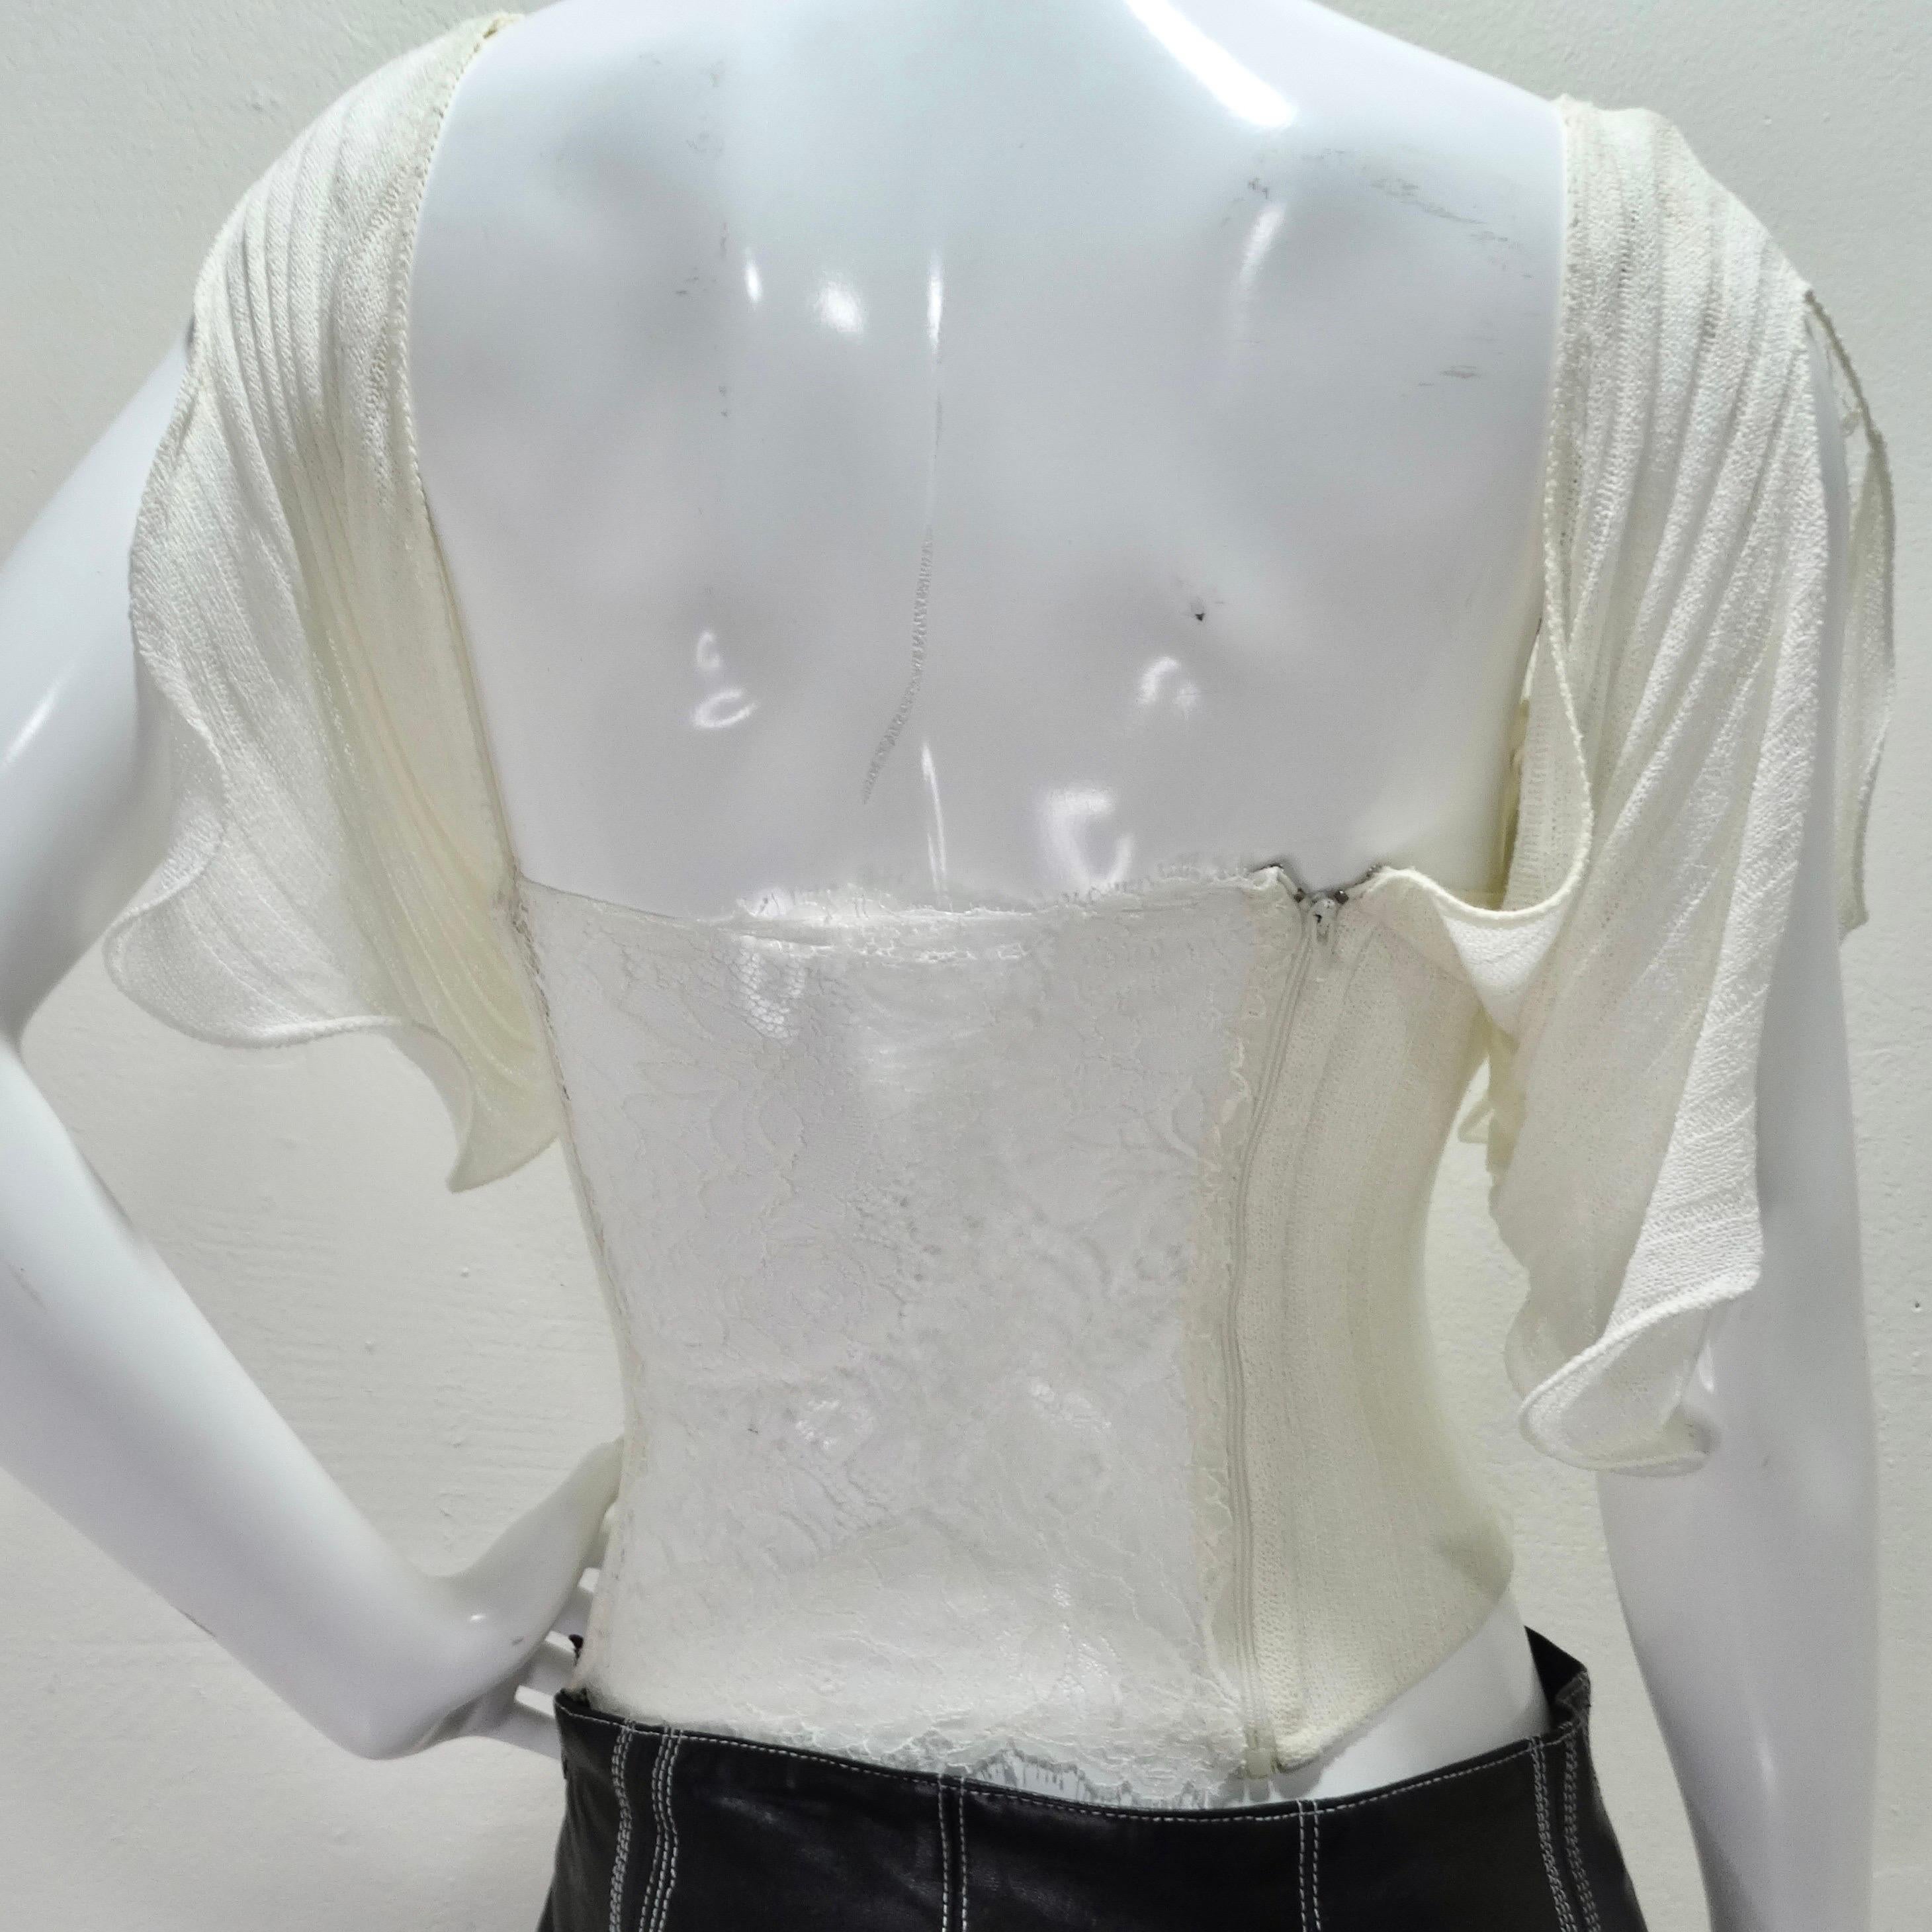 La Perla Rib Knit Lace Up Bustier Top In Good Condition For Sale In Scottsdale, AZ